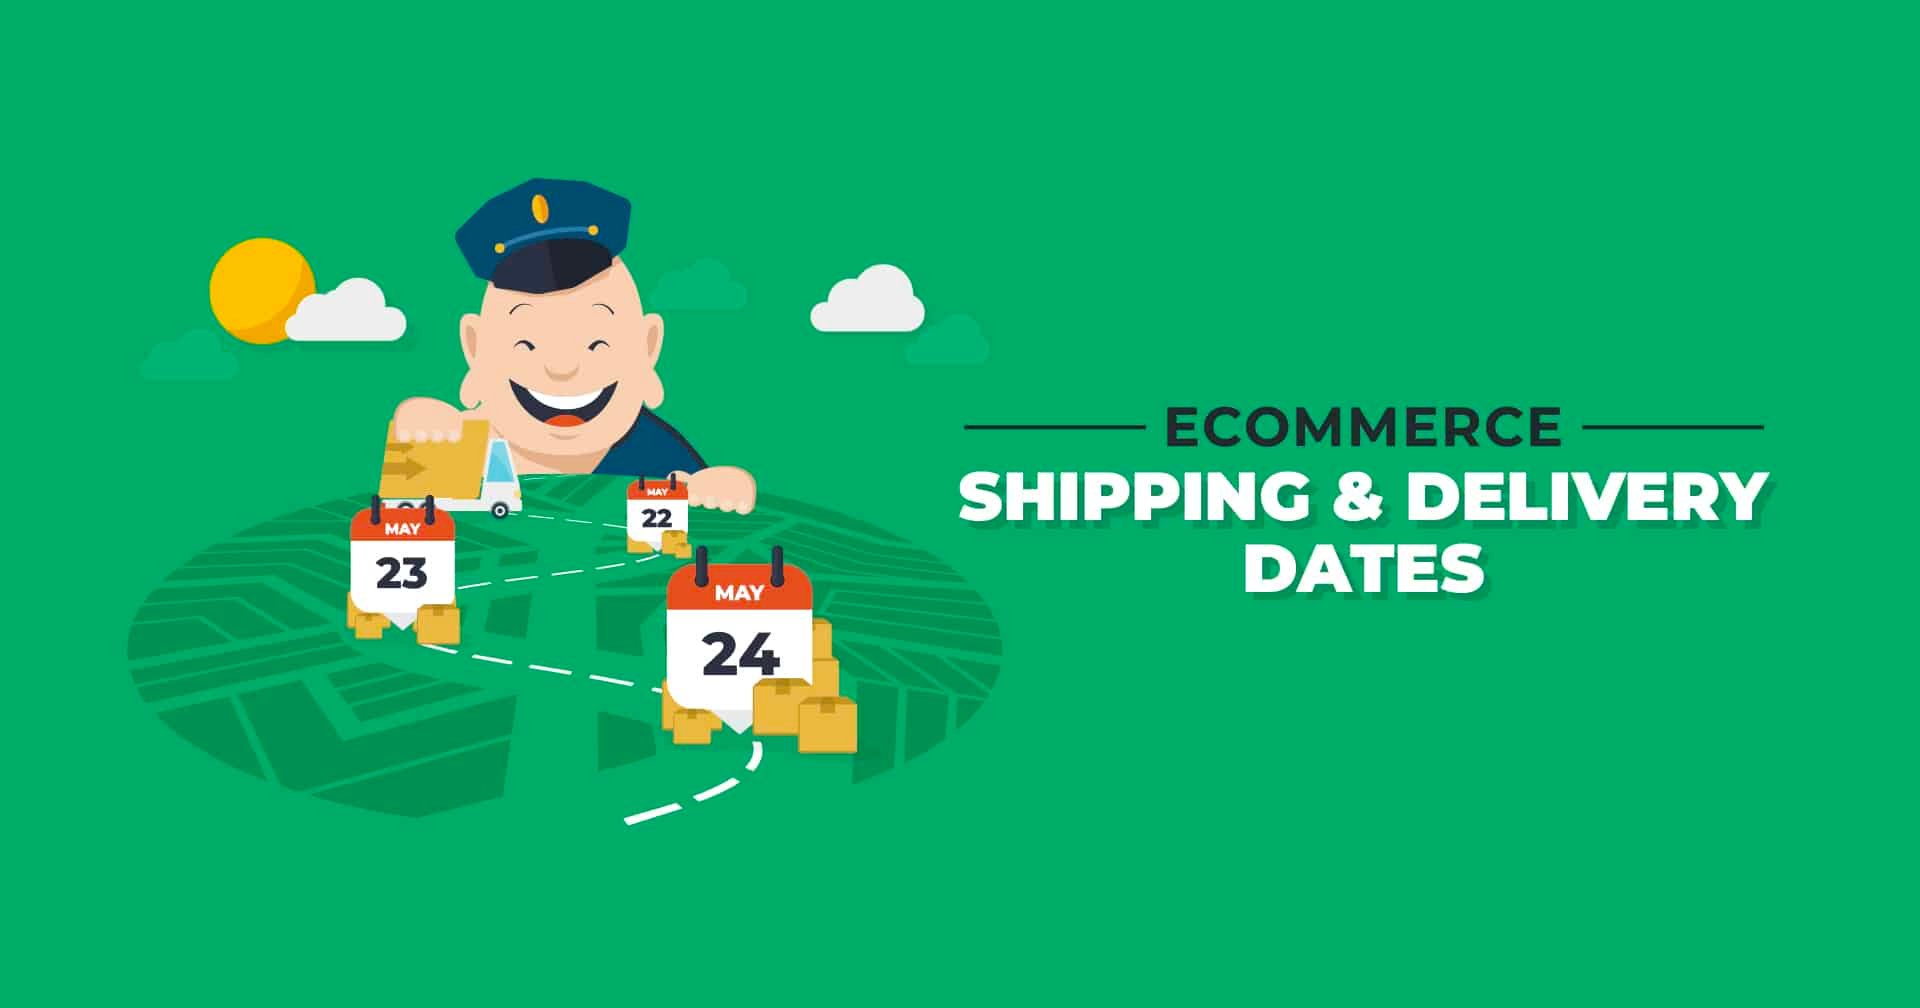 eCommerce Shipping & Delivery Dates